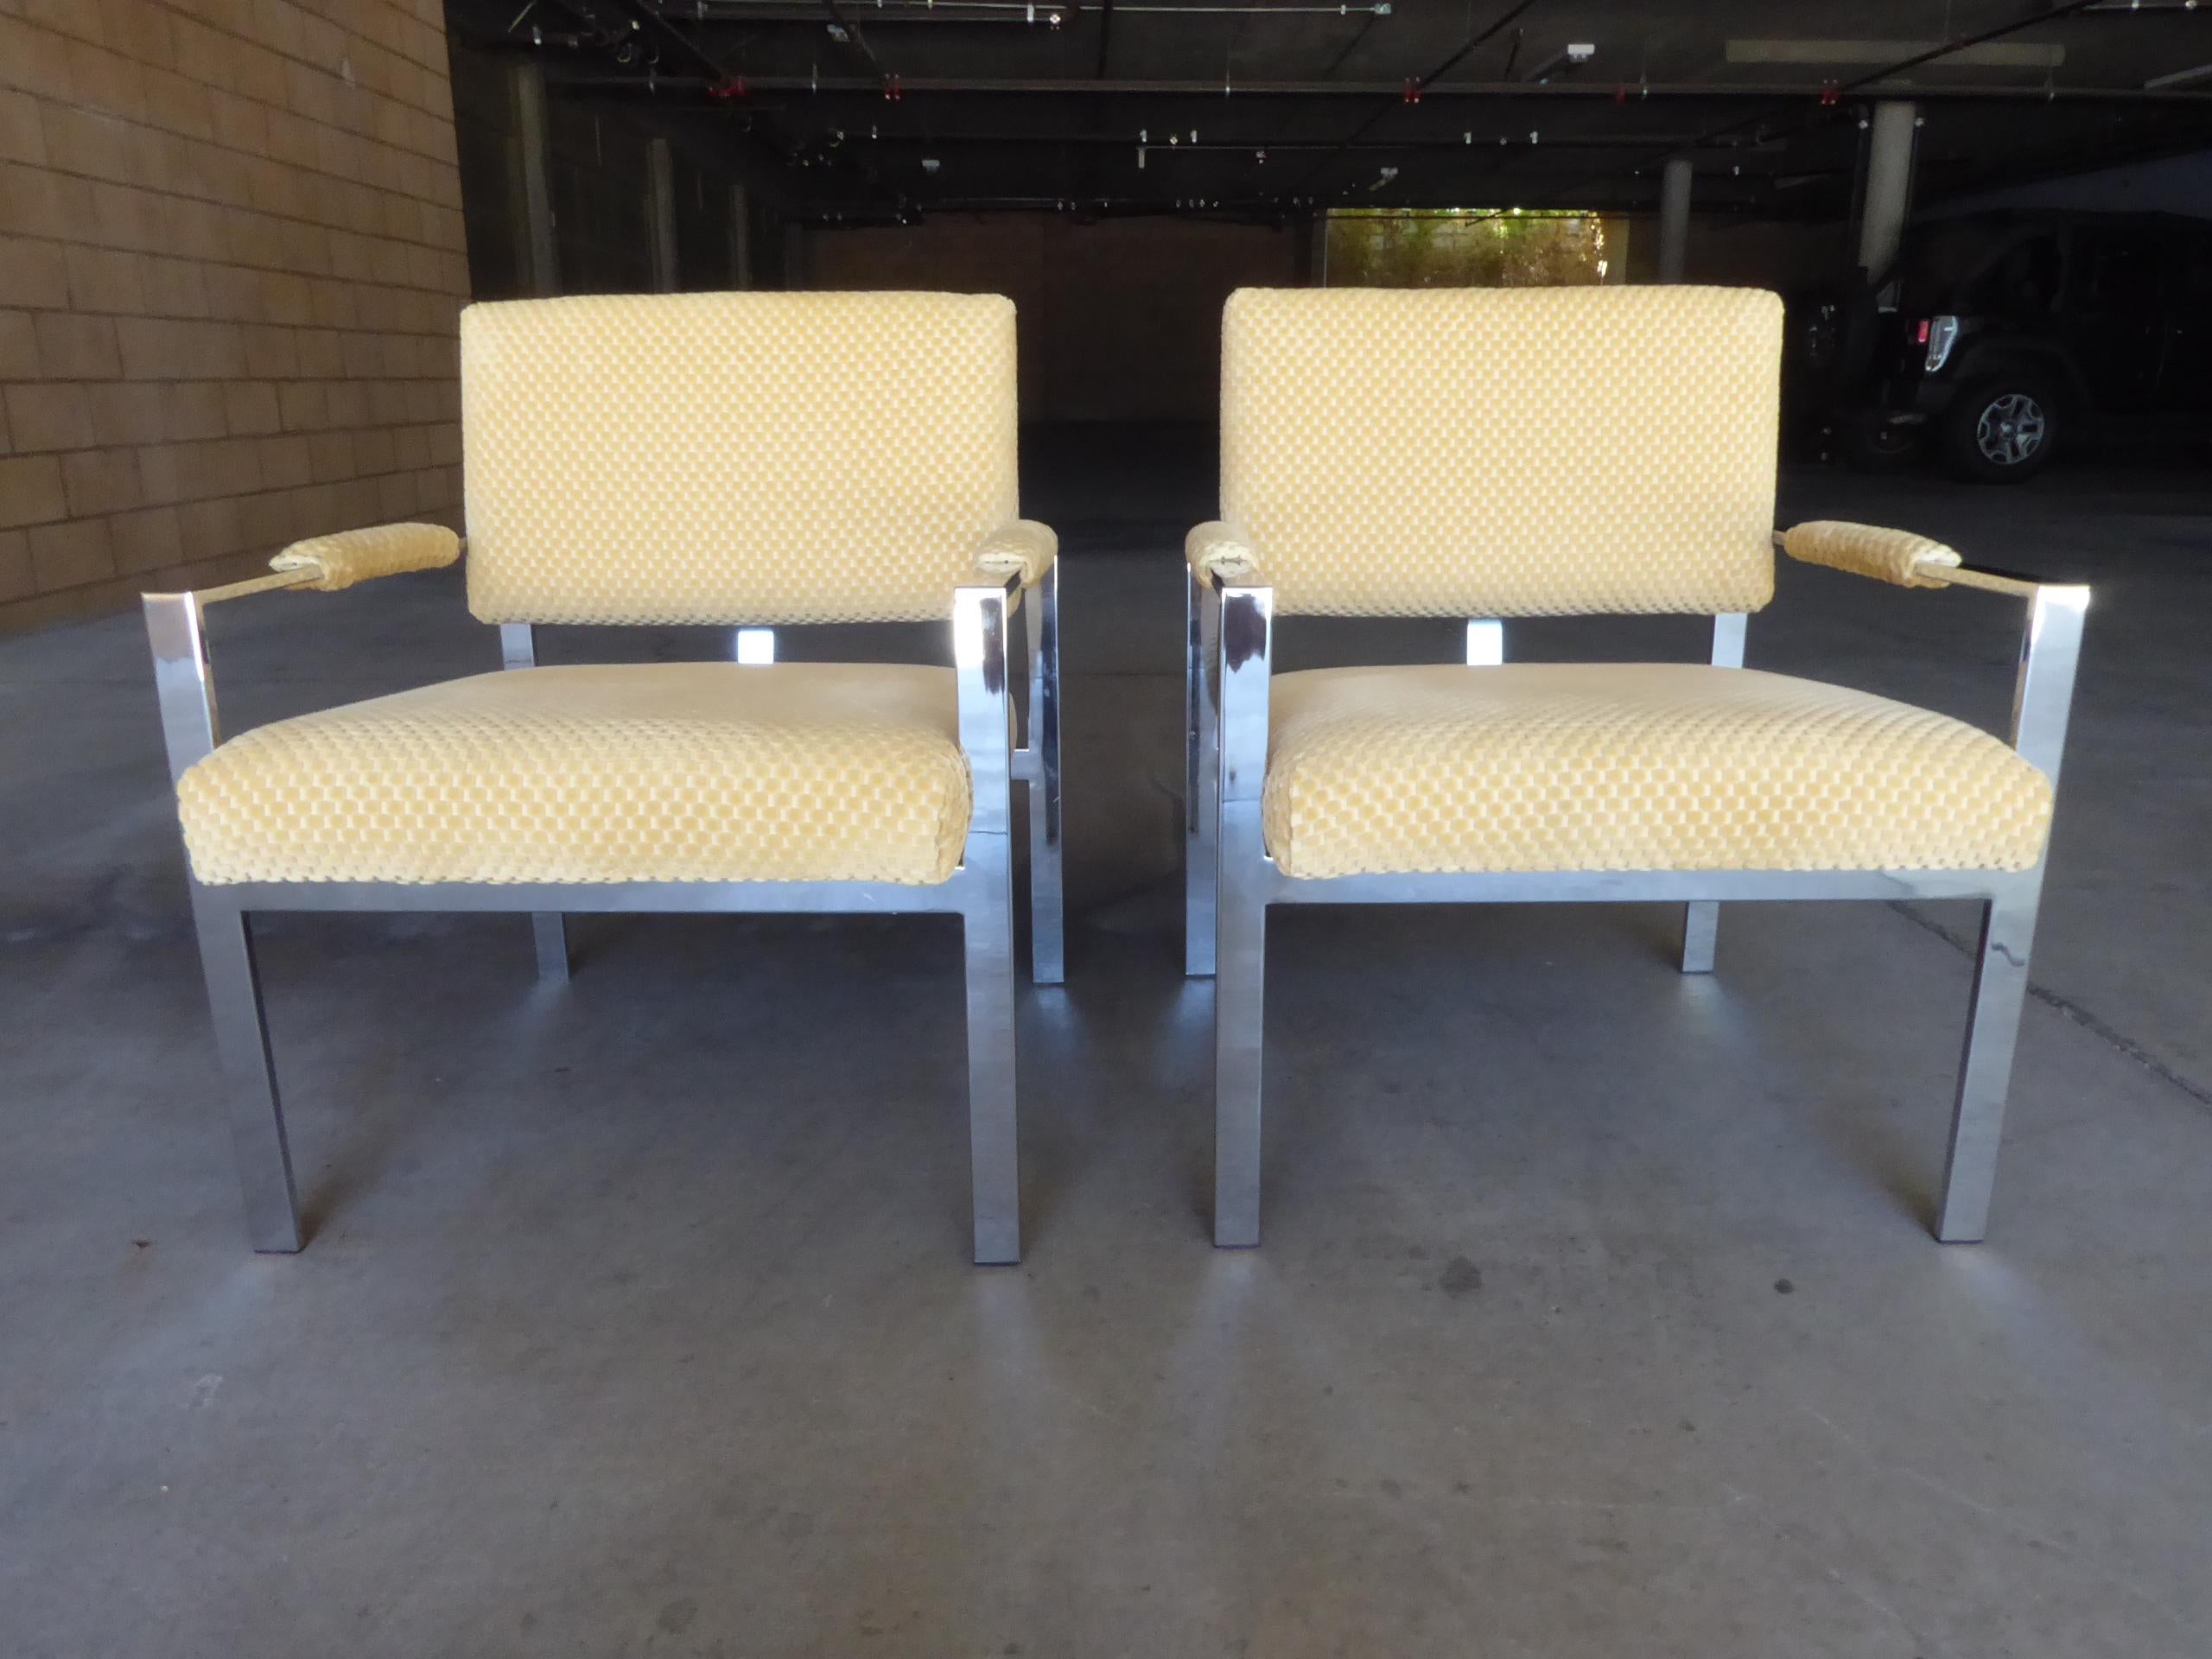 Plated Pair of Lounge Chairs Attributed to Harvey Probber for Thayer Coggin